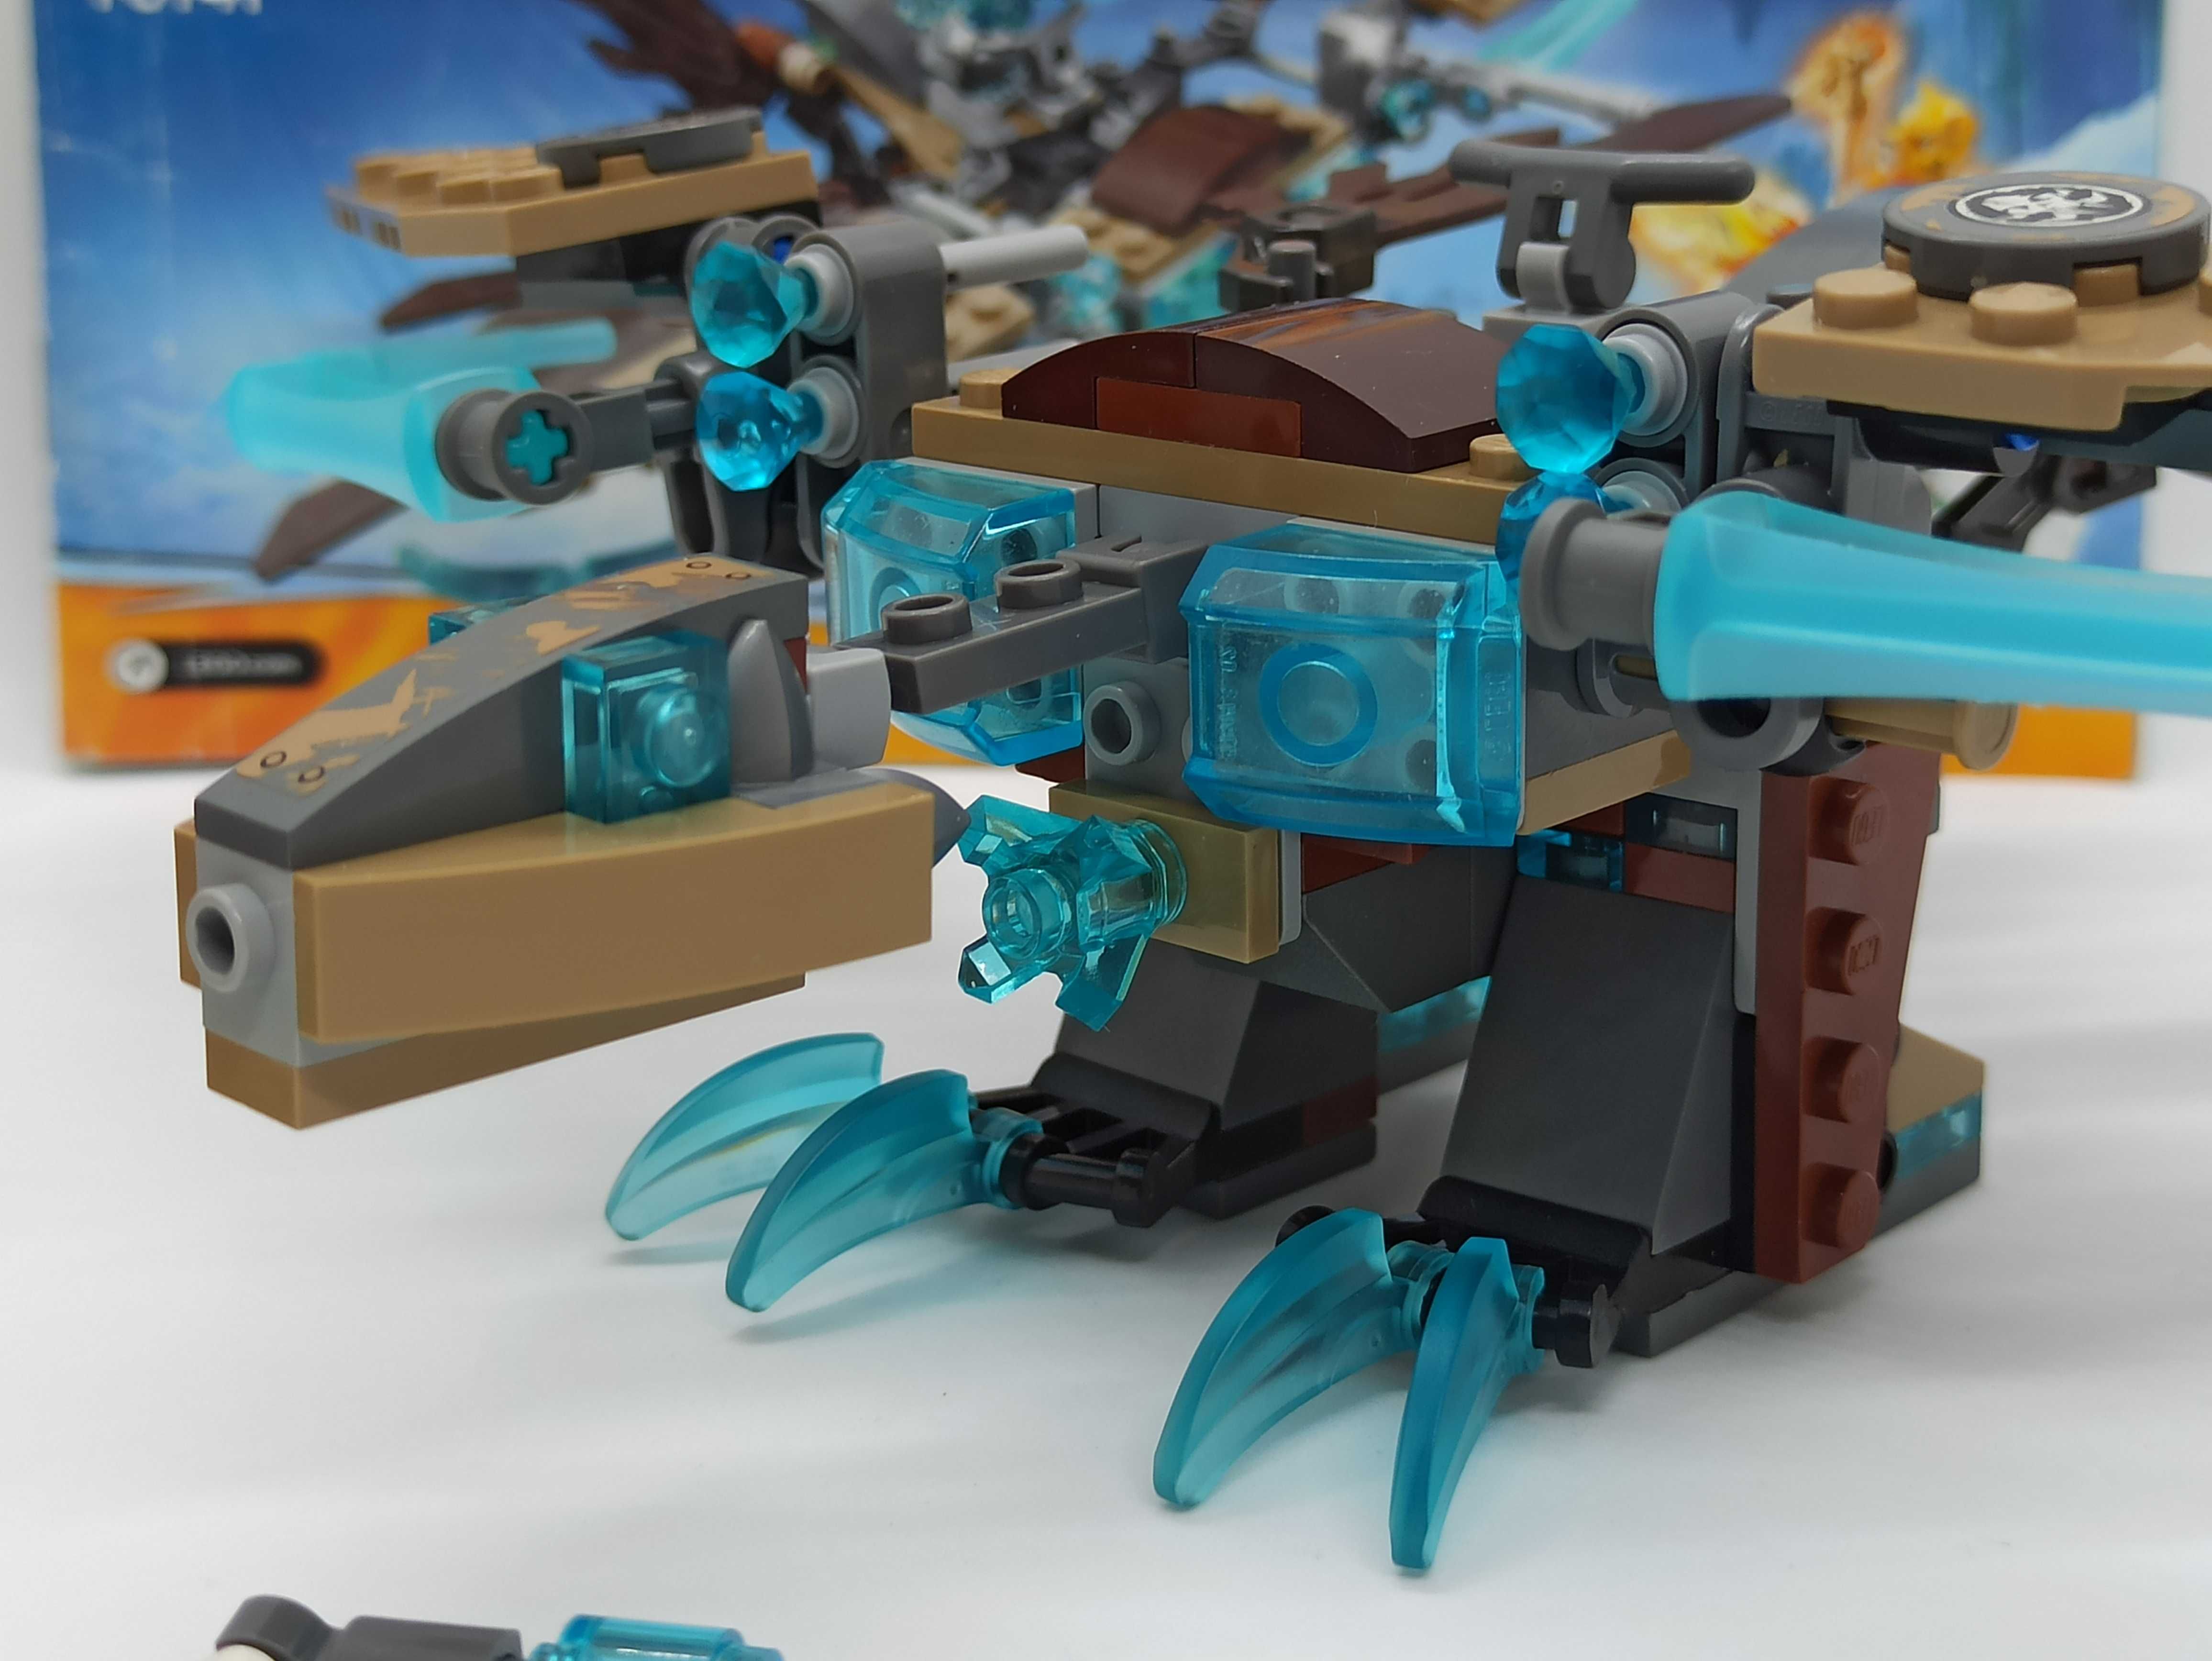 Lego 70141 Vardy's Ice Vulture Glider